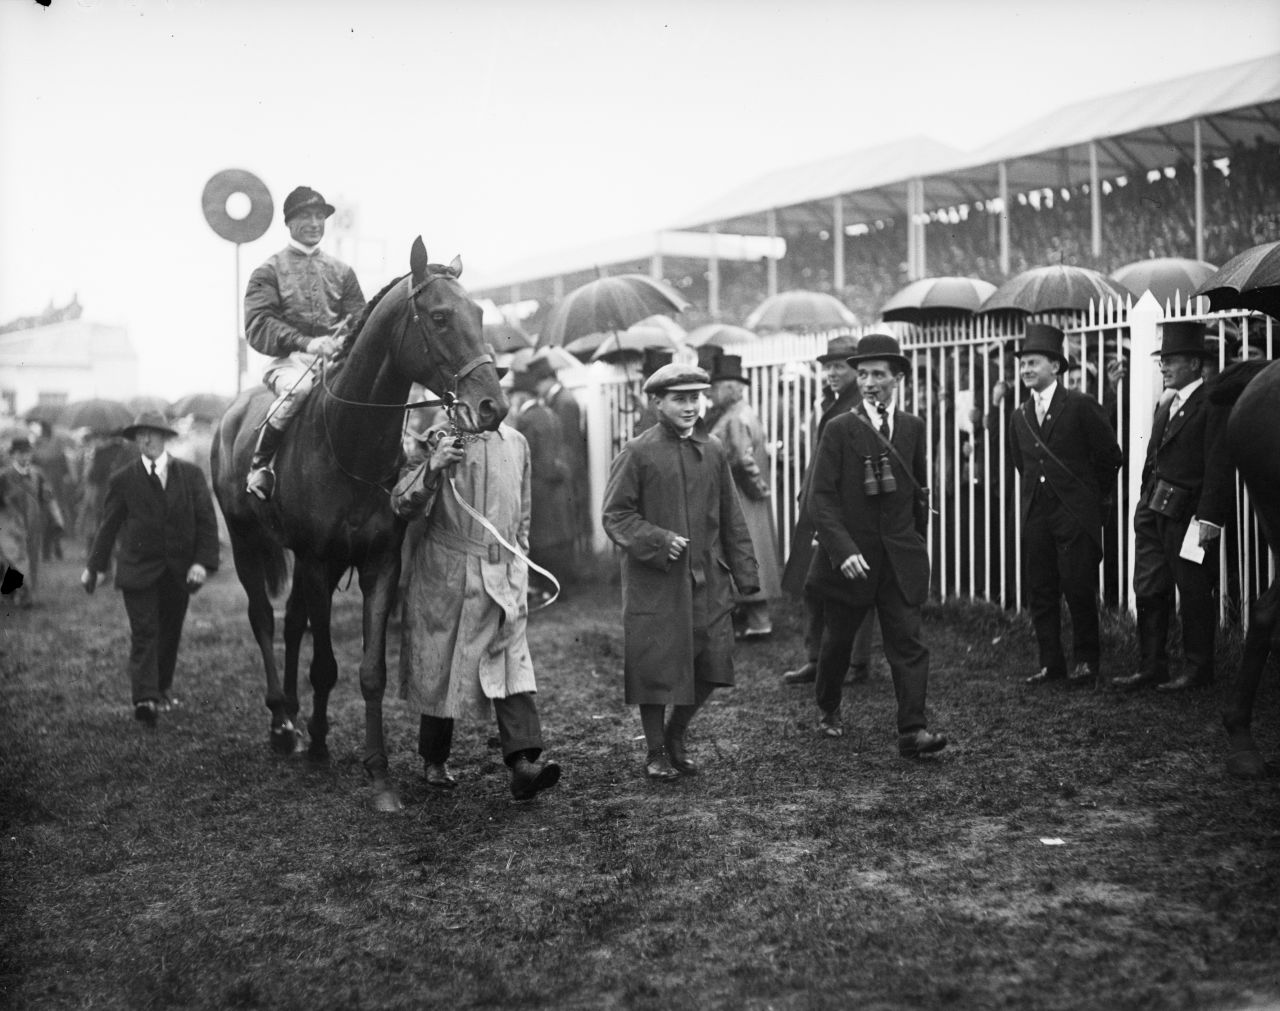 Britain's royals have strong links to racing. A horse owned by King George V is escorted home after winning the Steward's Cup at Royal Ascot in 1911.